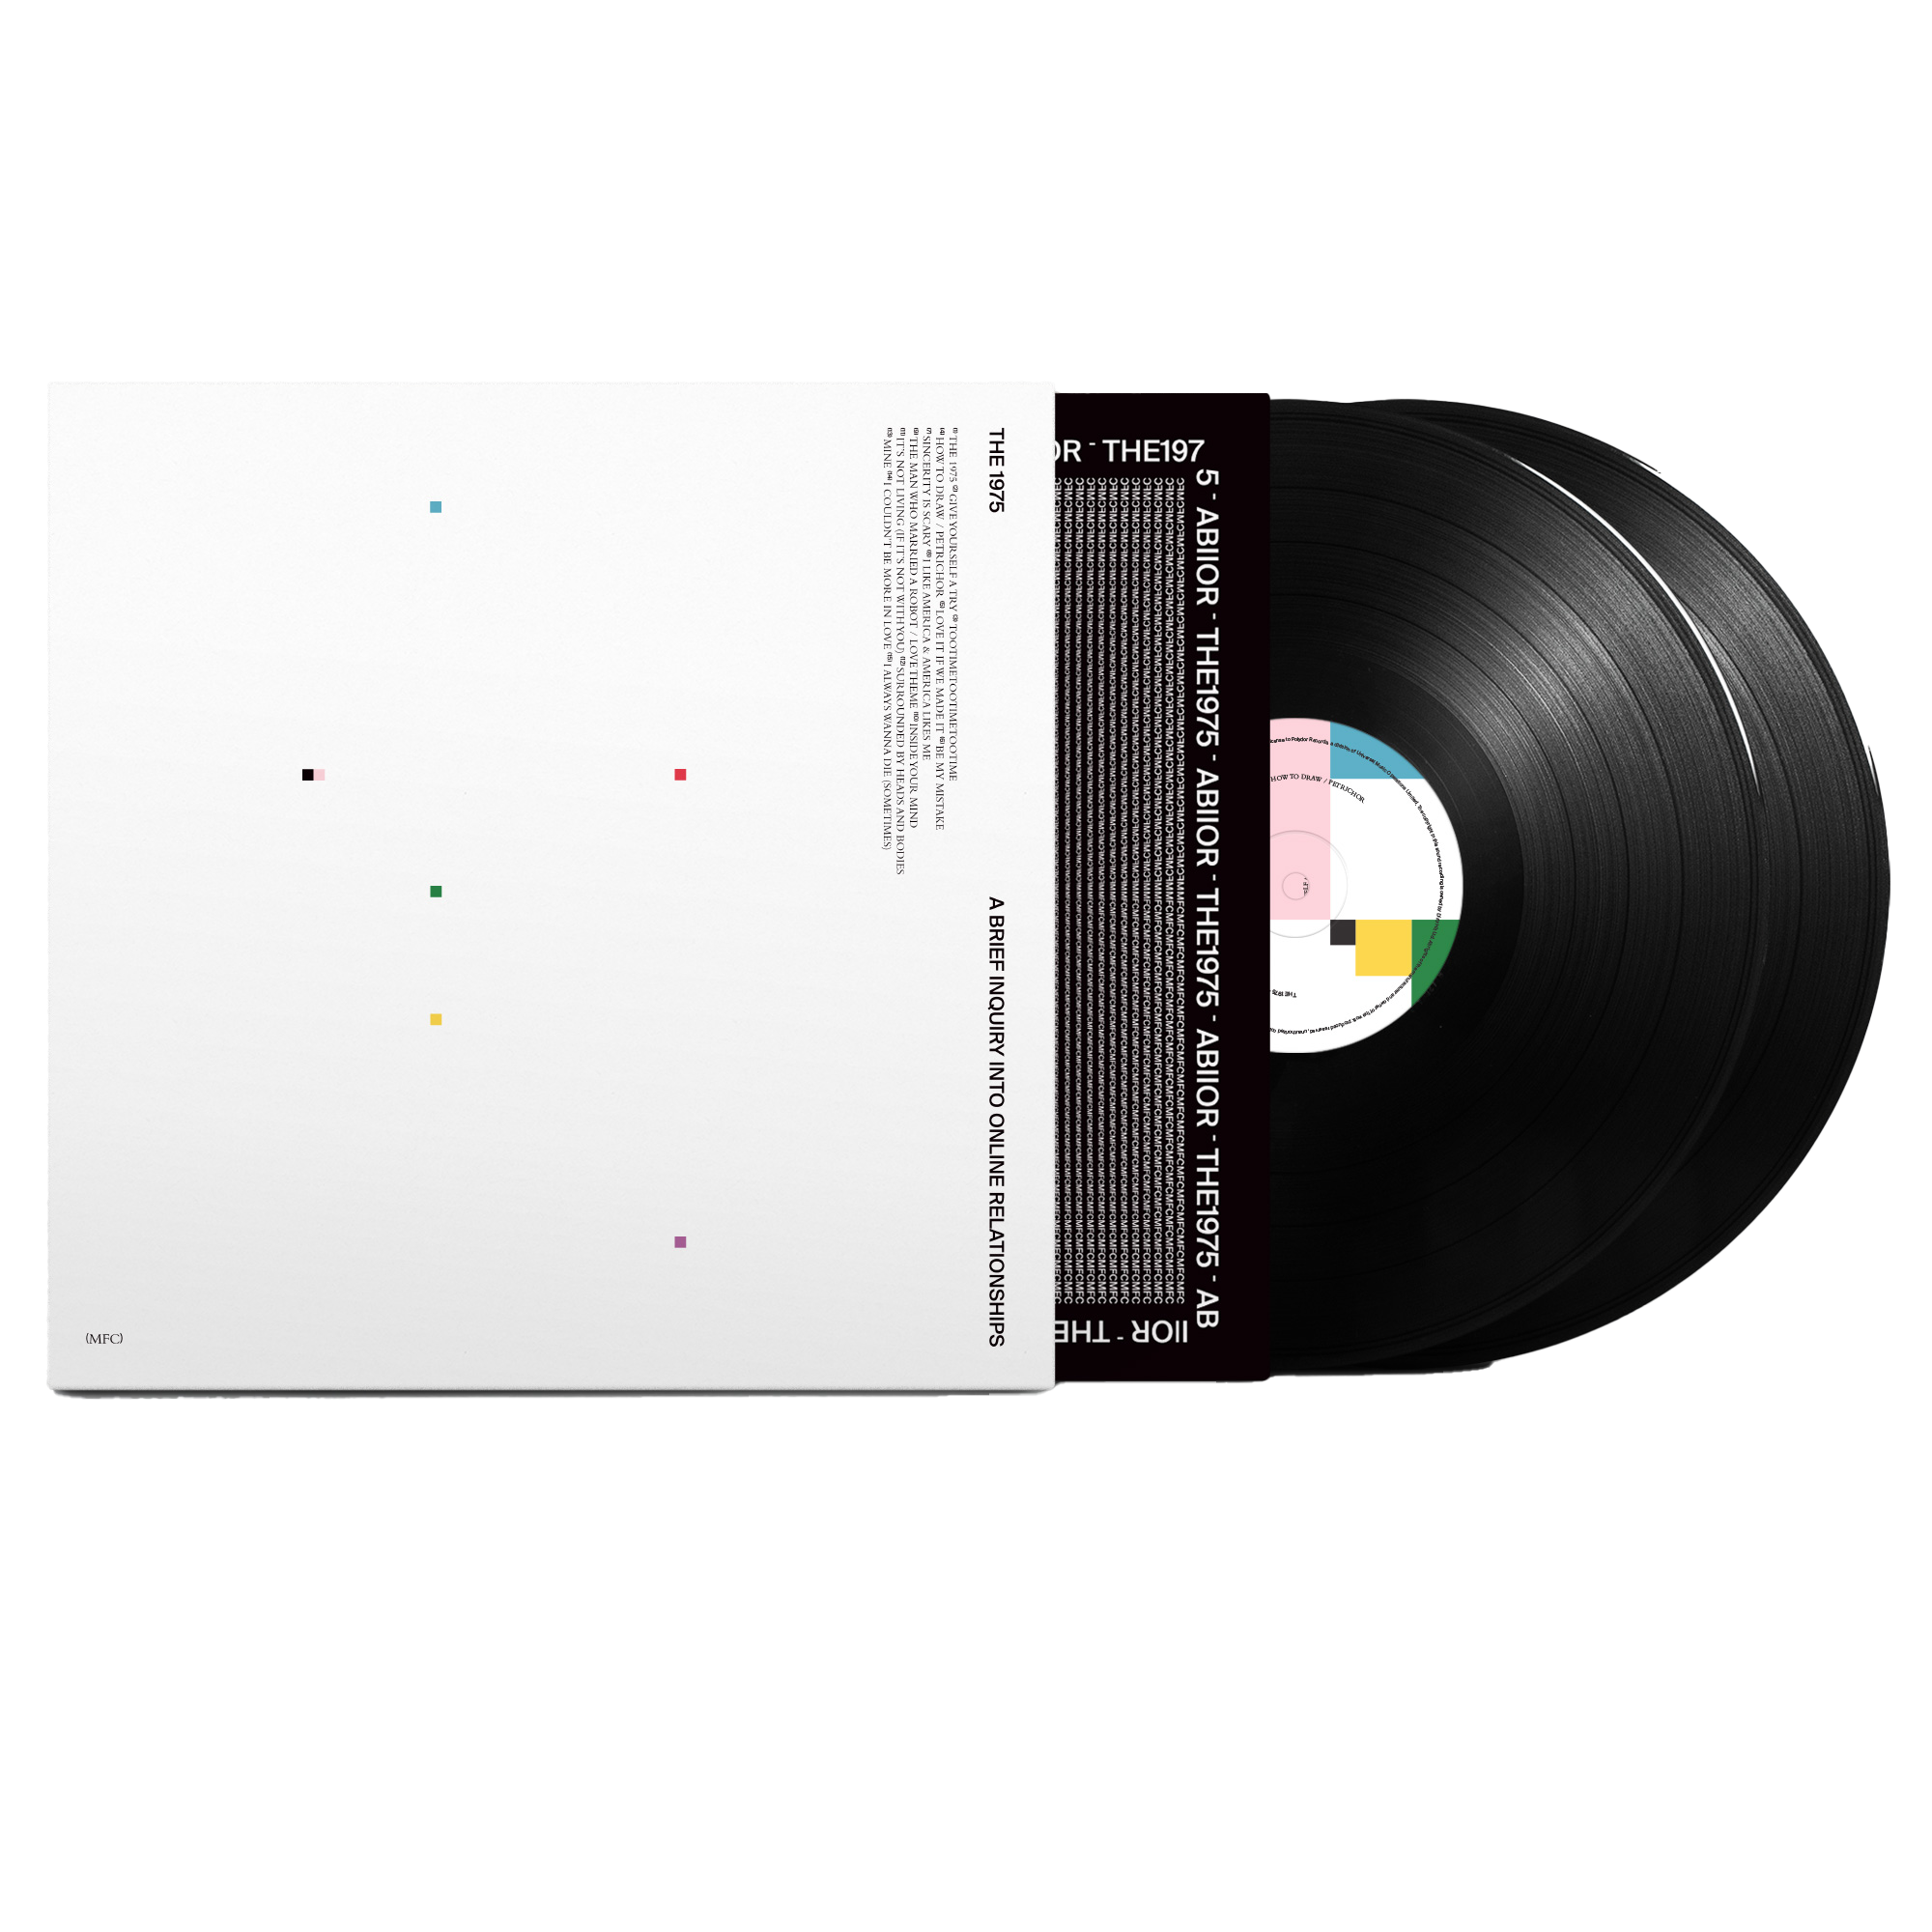 The 1975 - A Brief Inquiry Into Online Relationships Vinyl – 180g Double Gatefold Black Vinyl